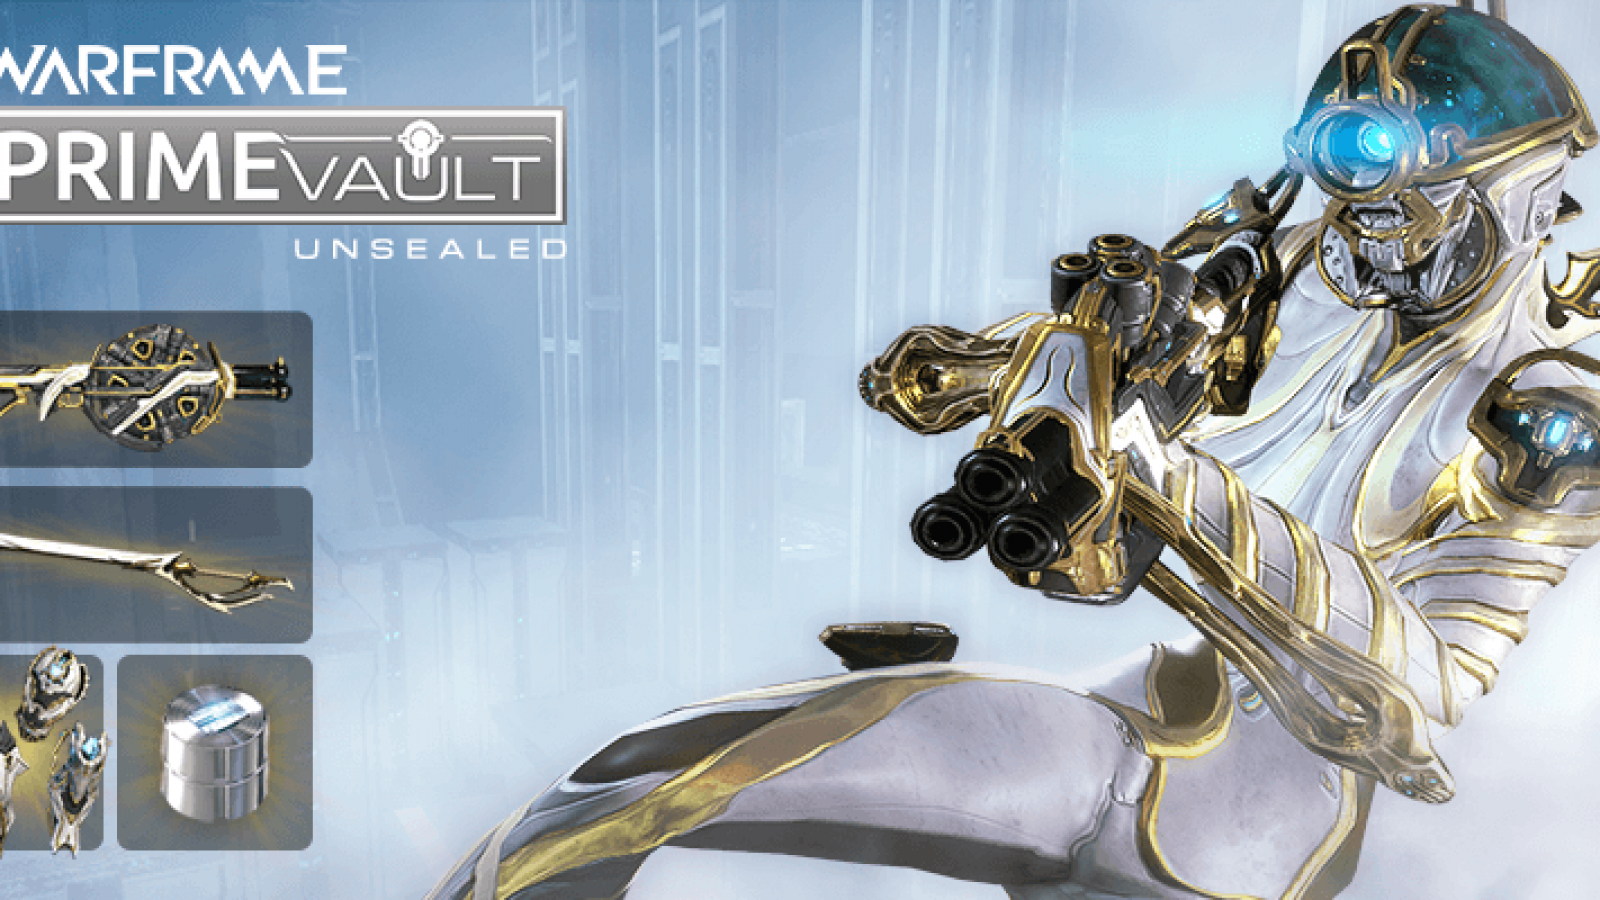 PRIME VAULT IS CLOSING - LAST CHANCE FOR MAG PRIME!